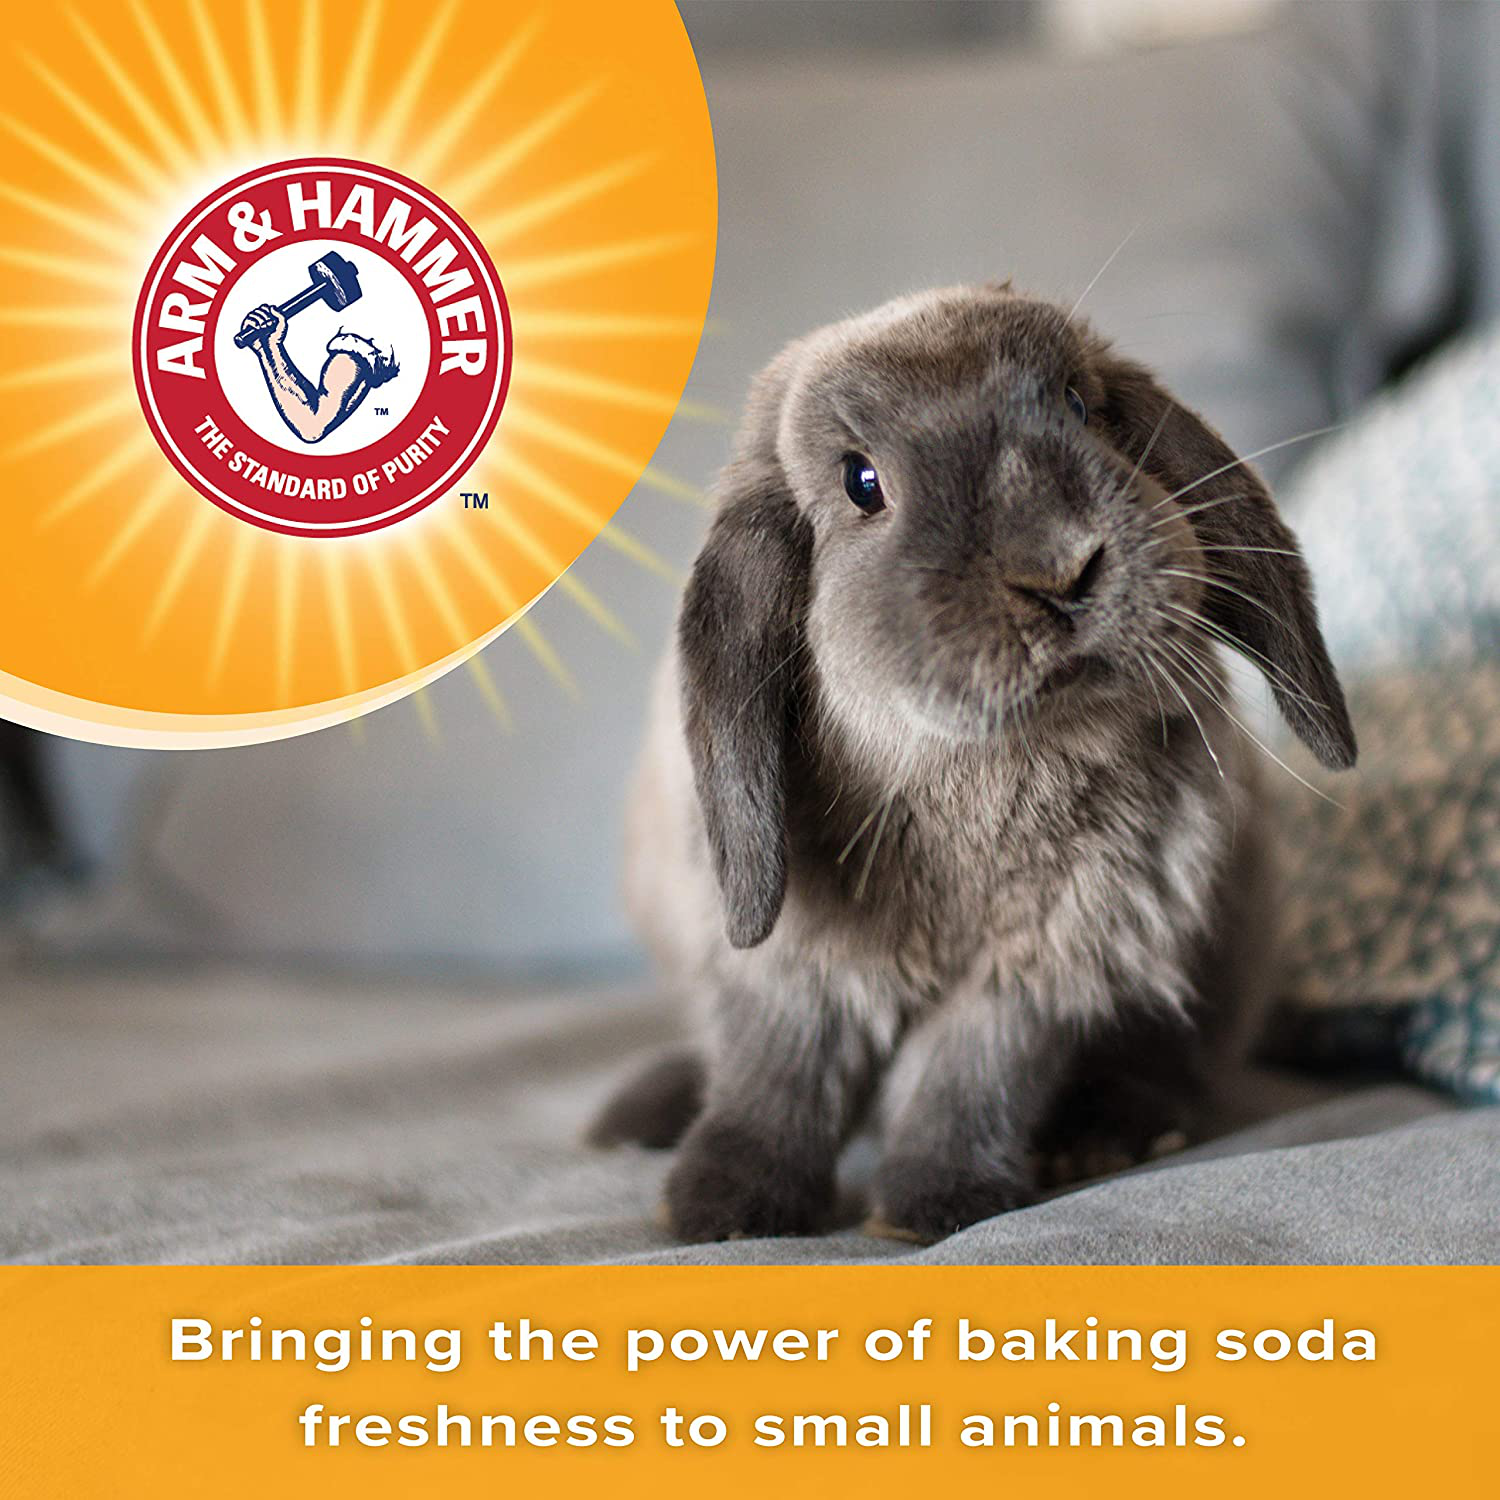 Arm & Hammer for Pets Natural Paper Bedding for Guinea Pigs, Hamsters, Rabbits & All Small Animals-Expandable Paper Bedding for Small Animals-Hamster Bedding, Guinea Pig Bedding, Bedding for Rabbits